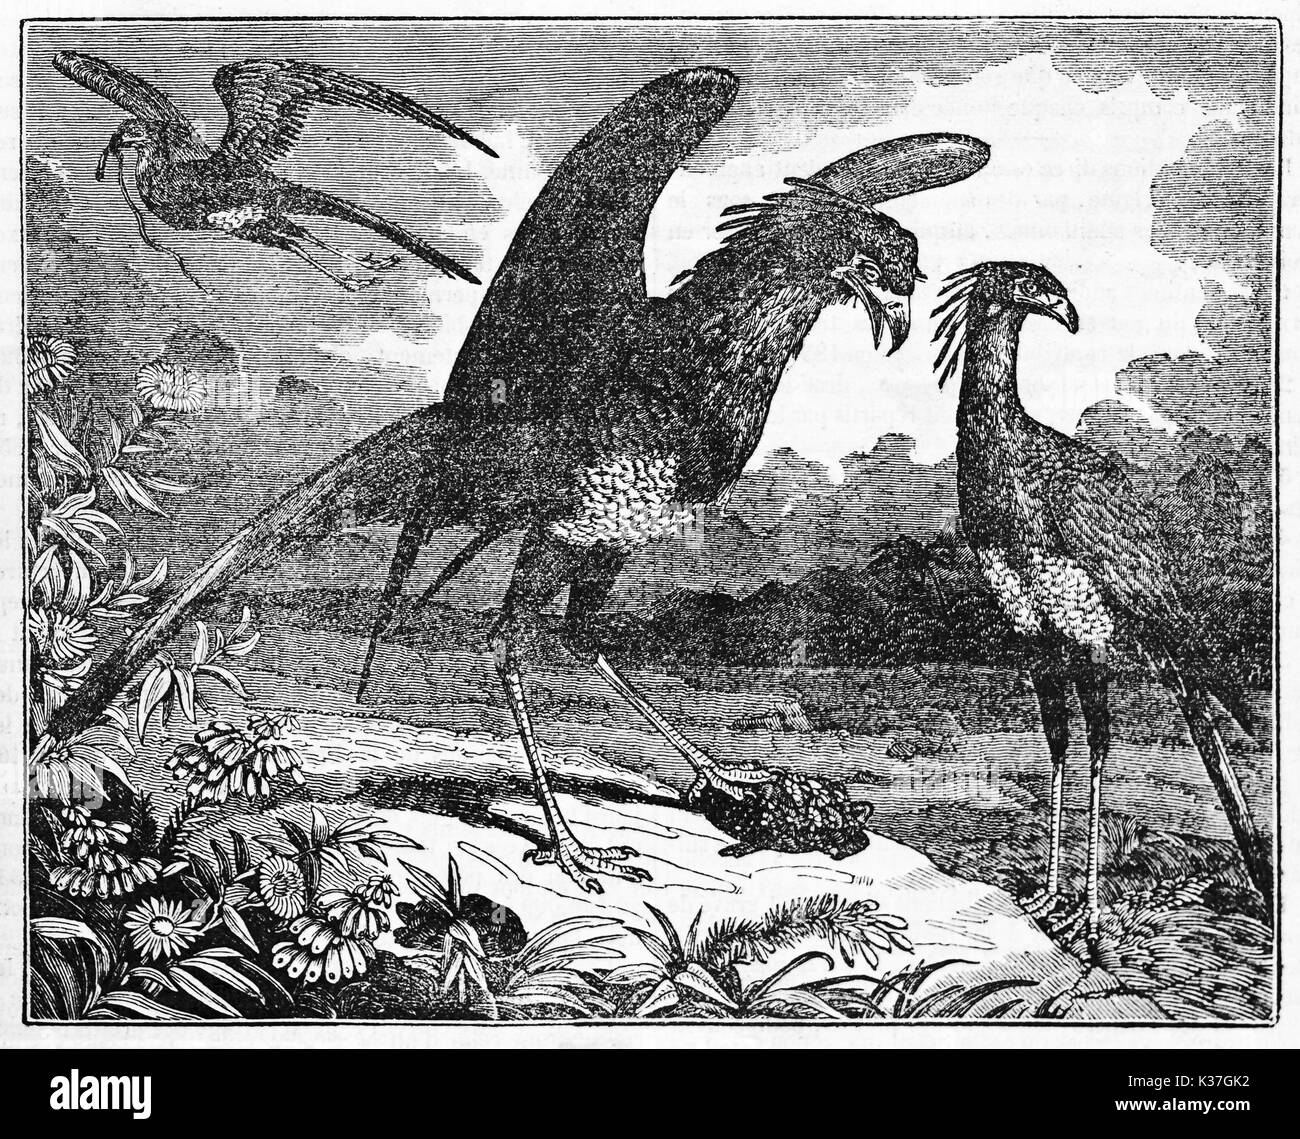 Secretarybird (Sagittarius serpentarius) in his natural environment courts a female exemplar. Old Illustration by unidentified author published on magasin Pittoresque Paris 1834 Stock Photo